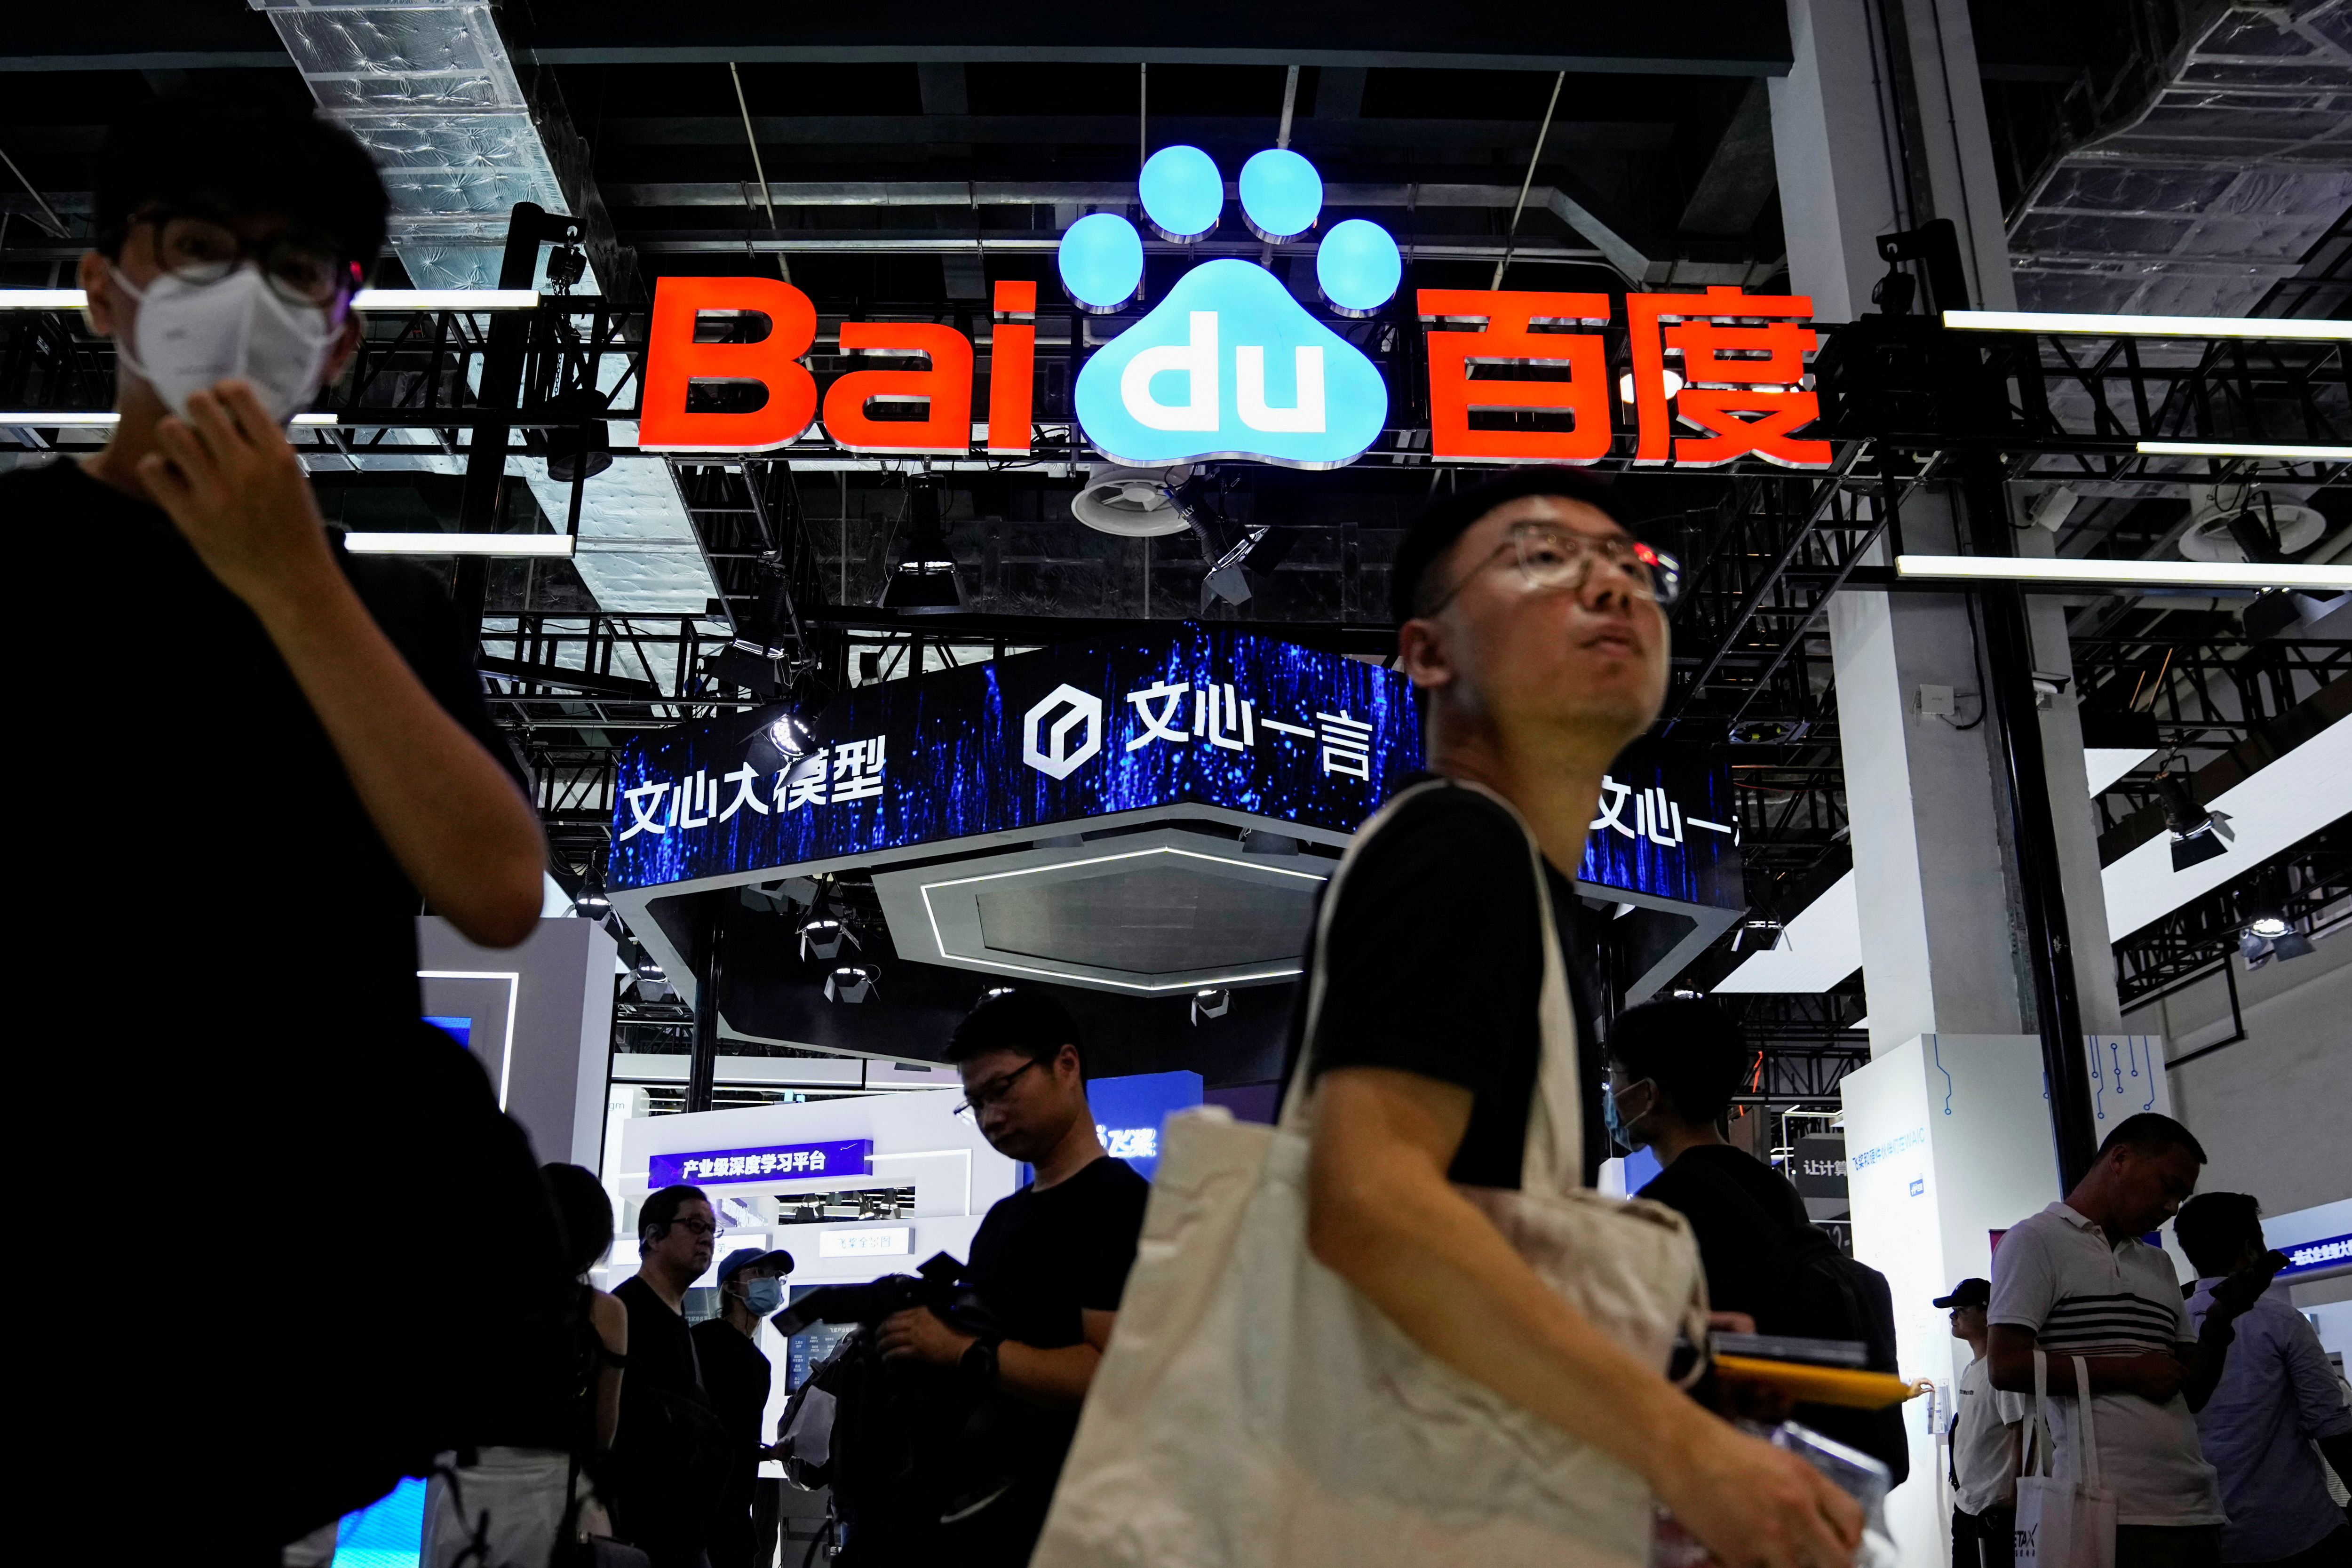 Baidu's Ernie chatbot has attracted more than 100 million users